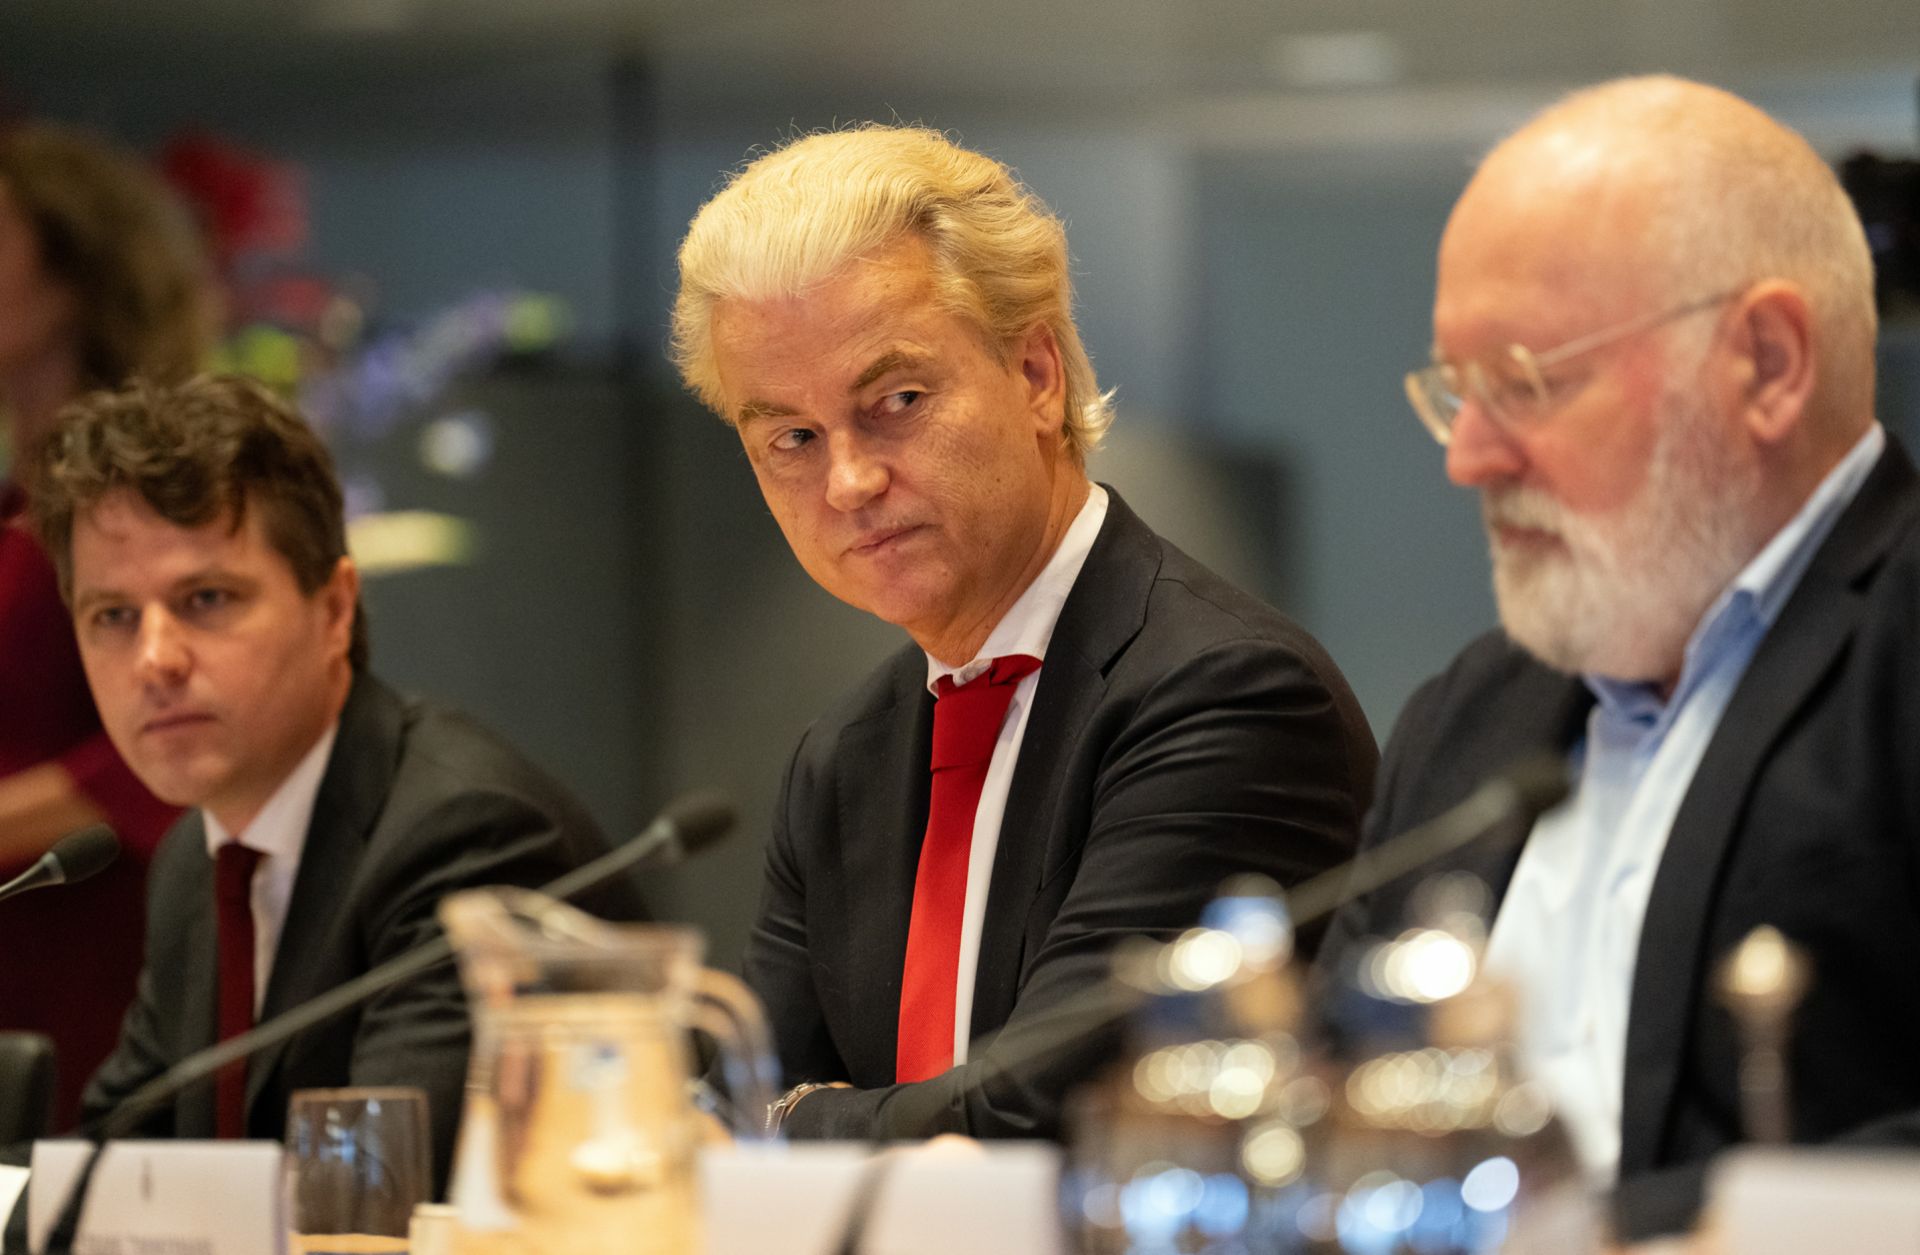 Geert Wilders (C), leader of the far-right Party for Freedom, sits next to Frans Timmermans (R), leader of the Green Left-Labor Party alliance, and Henri Bontenbal (L), leader of the Christian Democratic Appeal party, during a meeting in the Dutch parliament on Nov. 24, 2023, in The Hague, Netherlands. The party leaders are discussing the formation of a coalition government following Wilders' victory in the Nov. 22 general election.